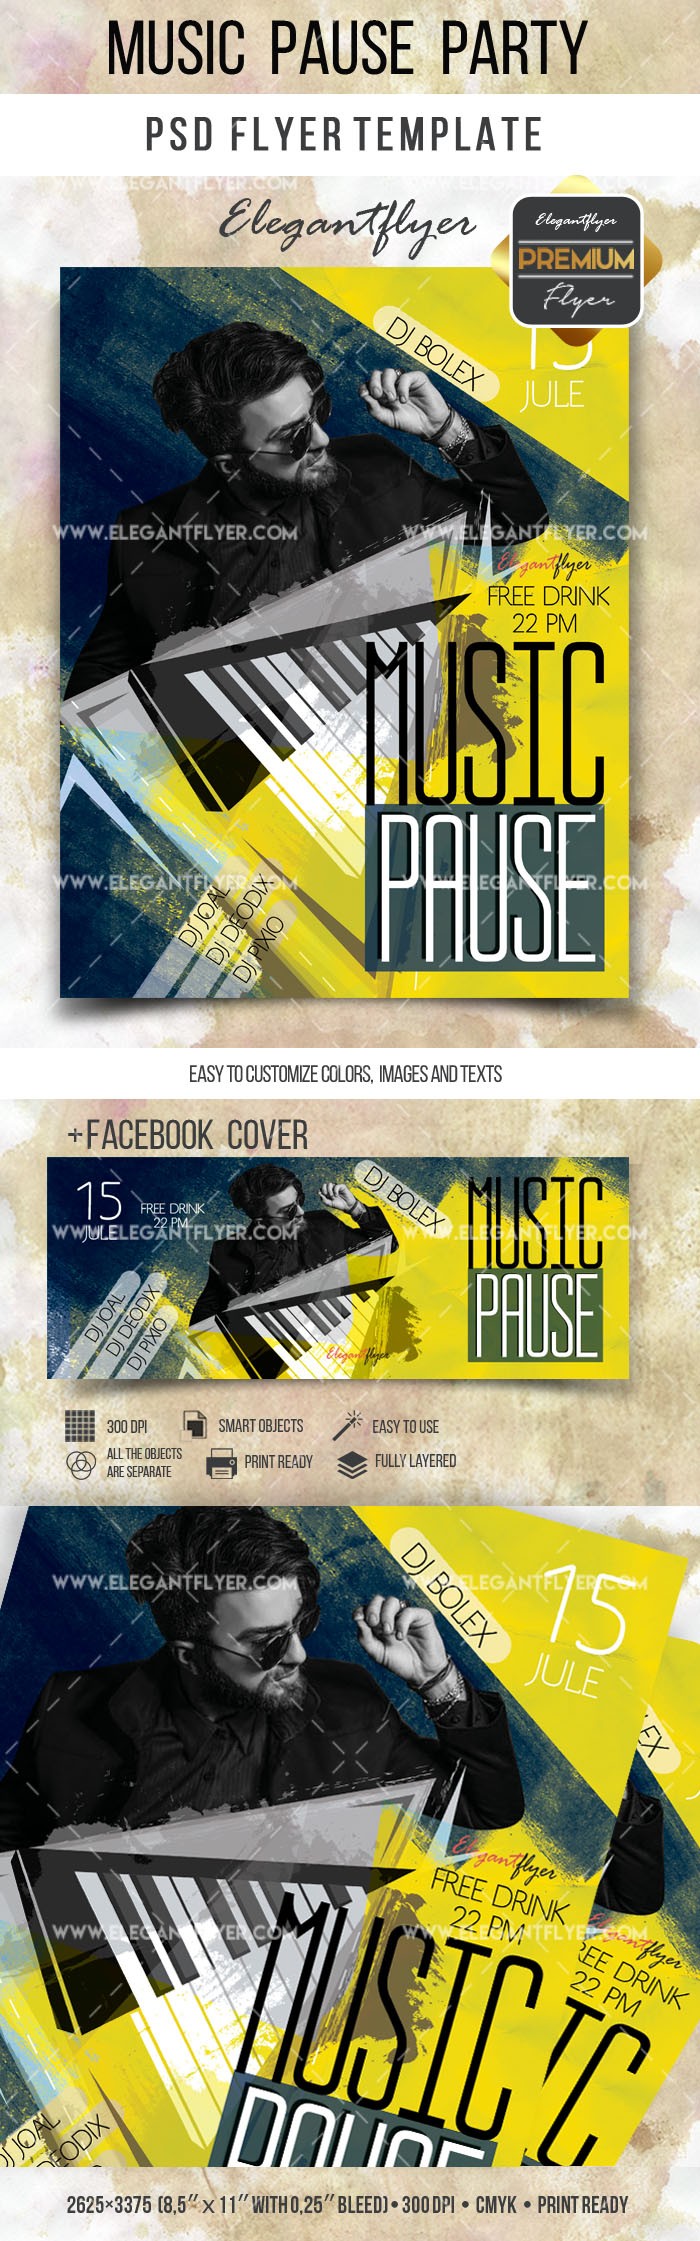 Music Pause Party by ElegantFlyer